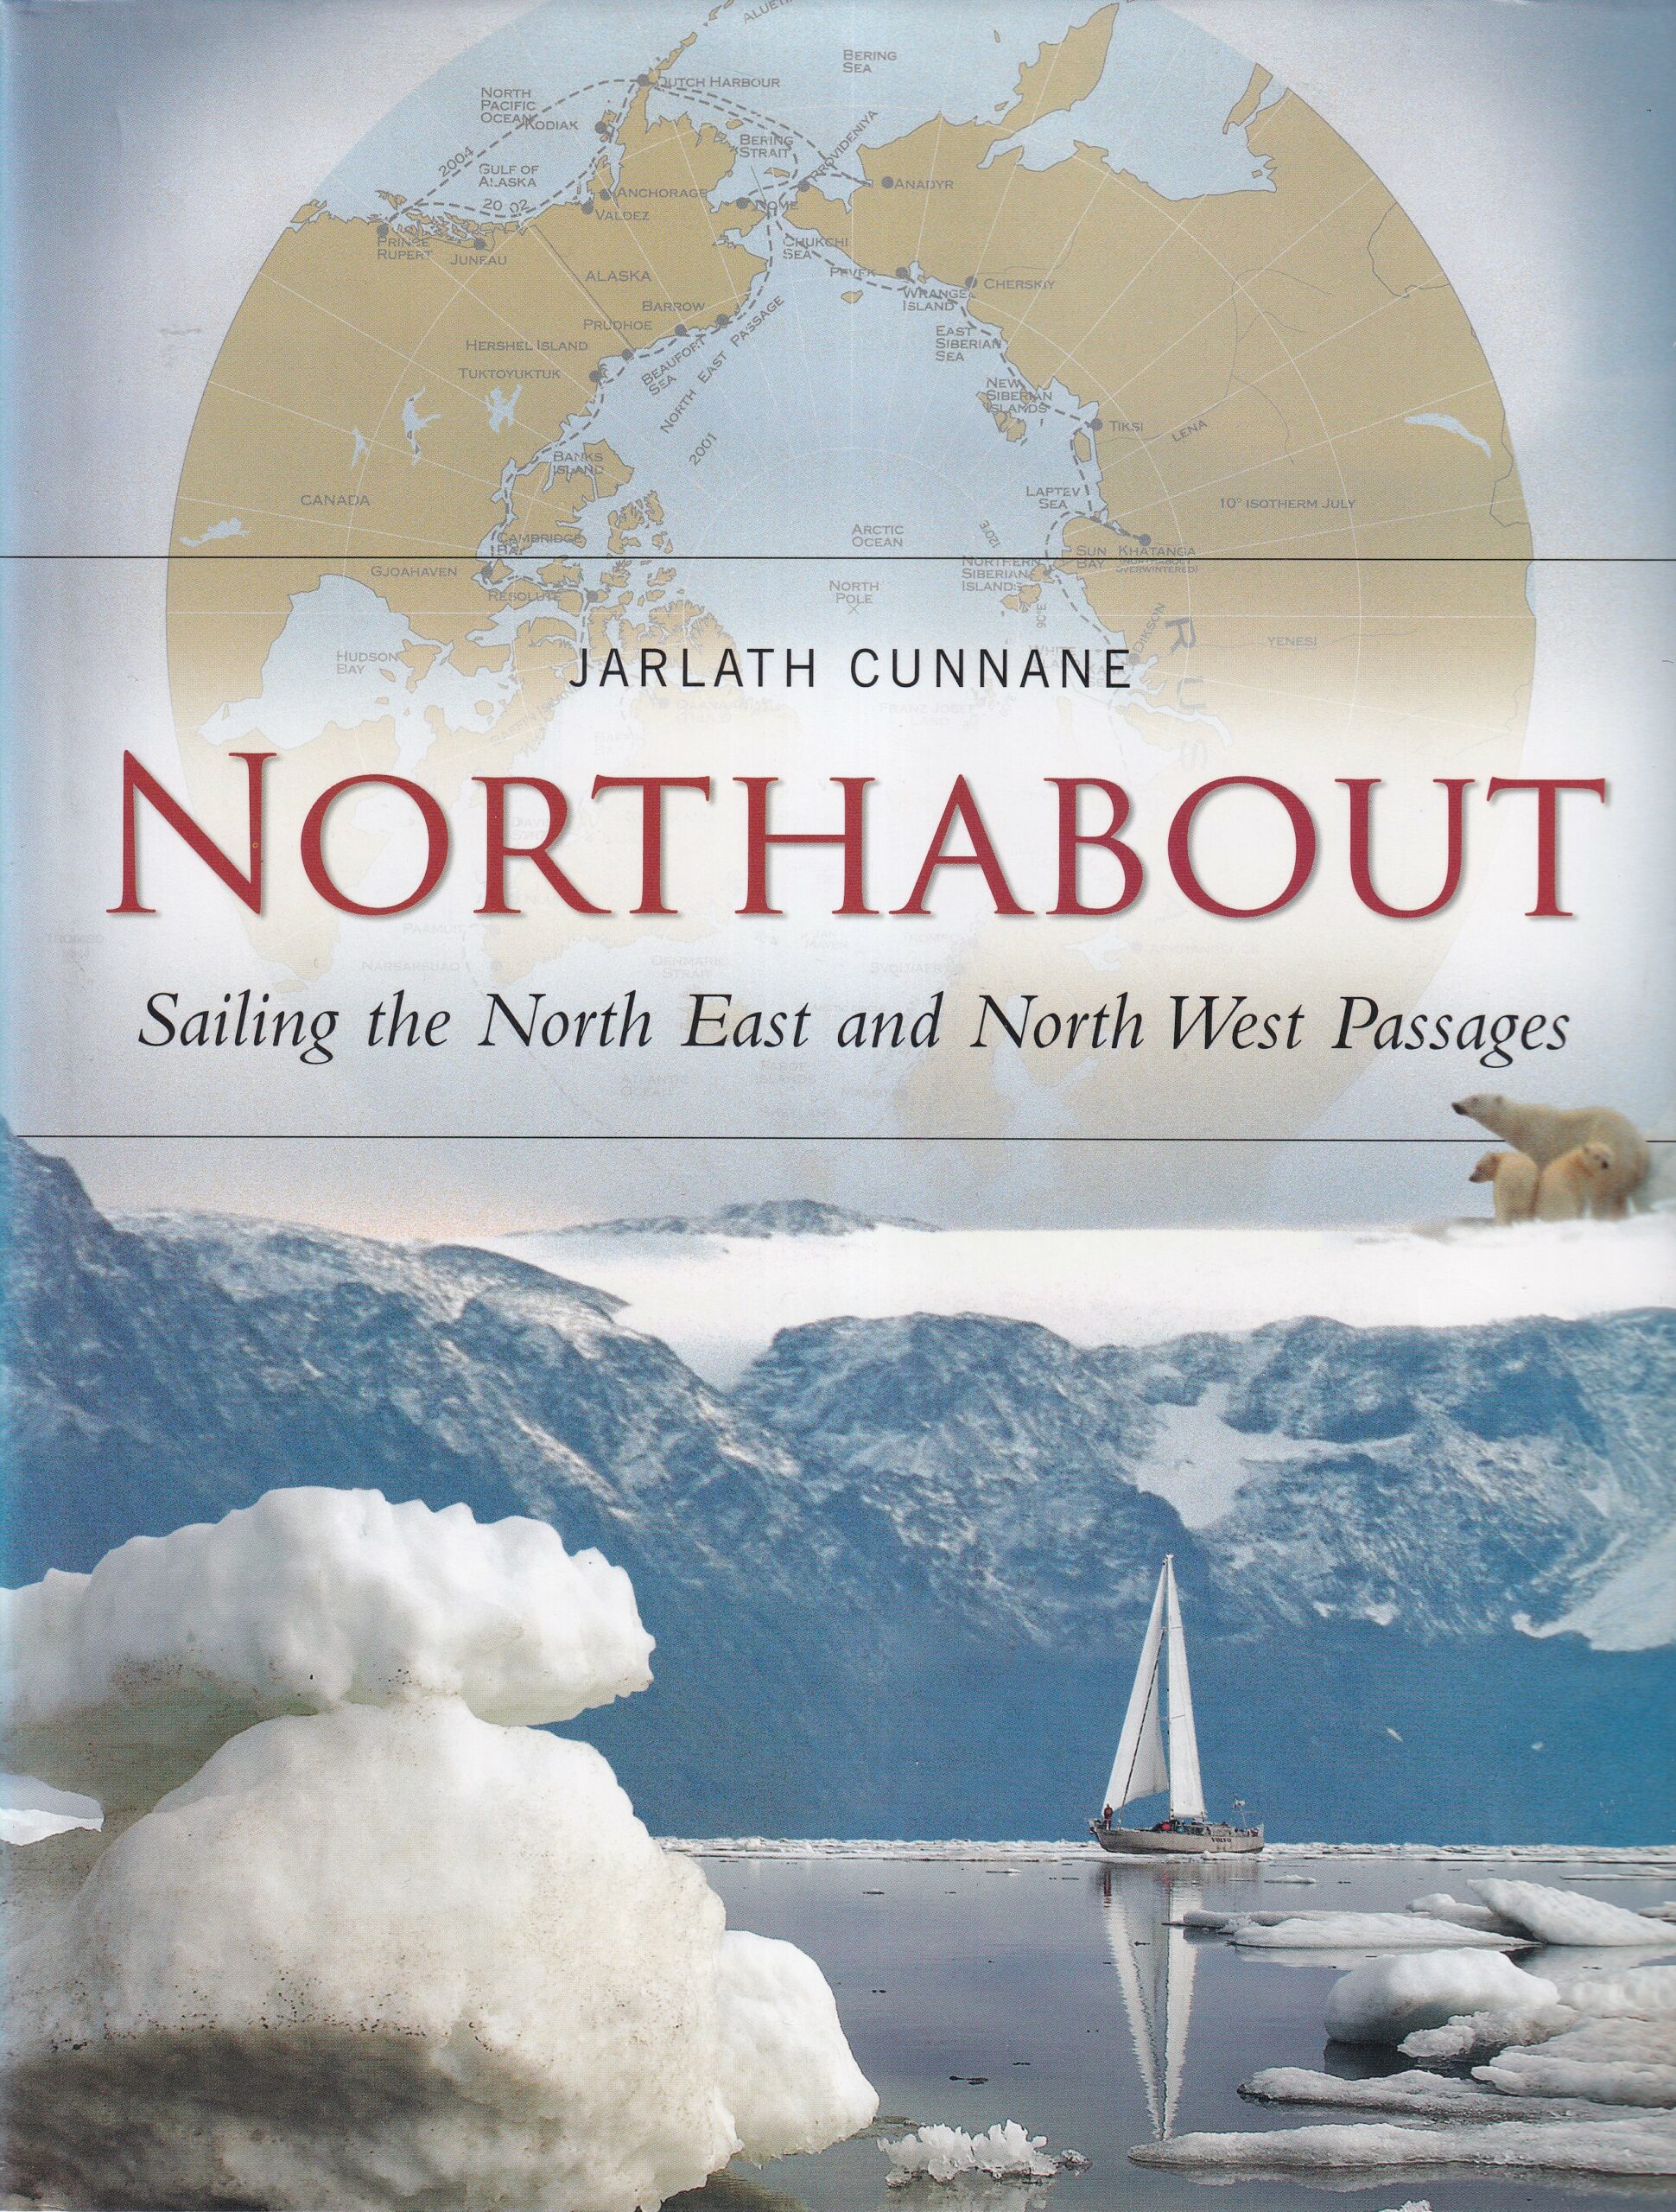 Northabout: Sailing the North East and North West Passages | Jarlath Cunnane | Charlie Byrne's